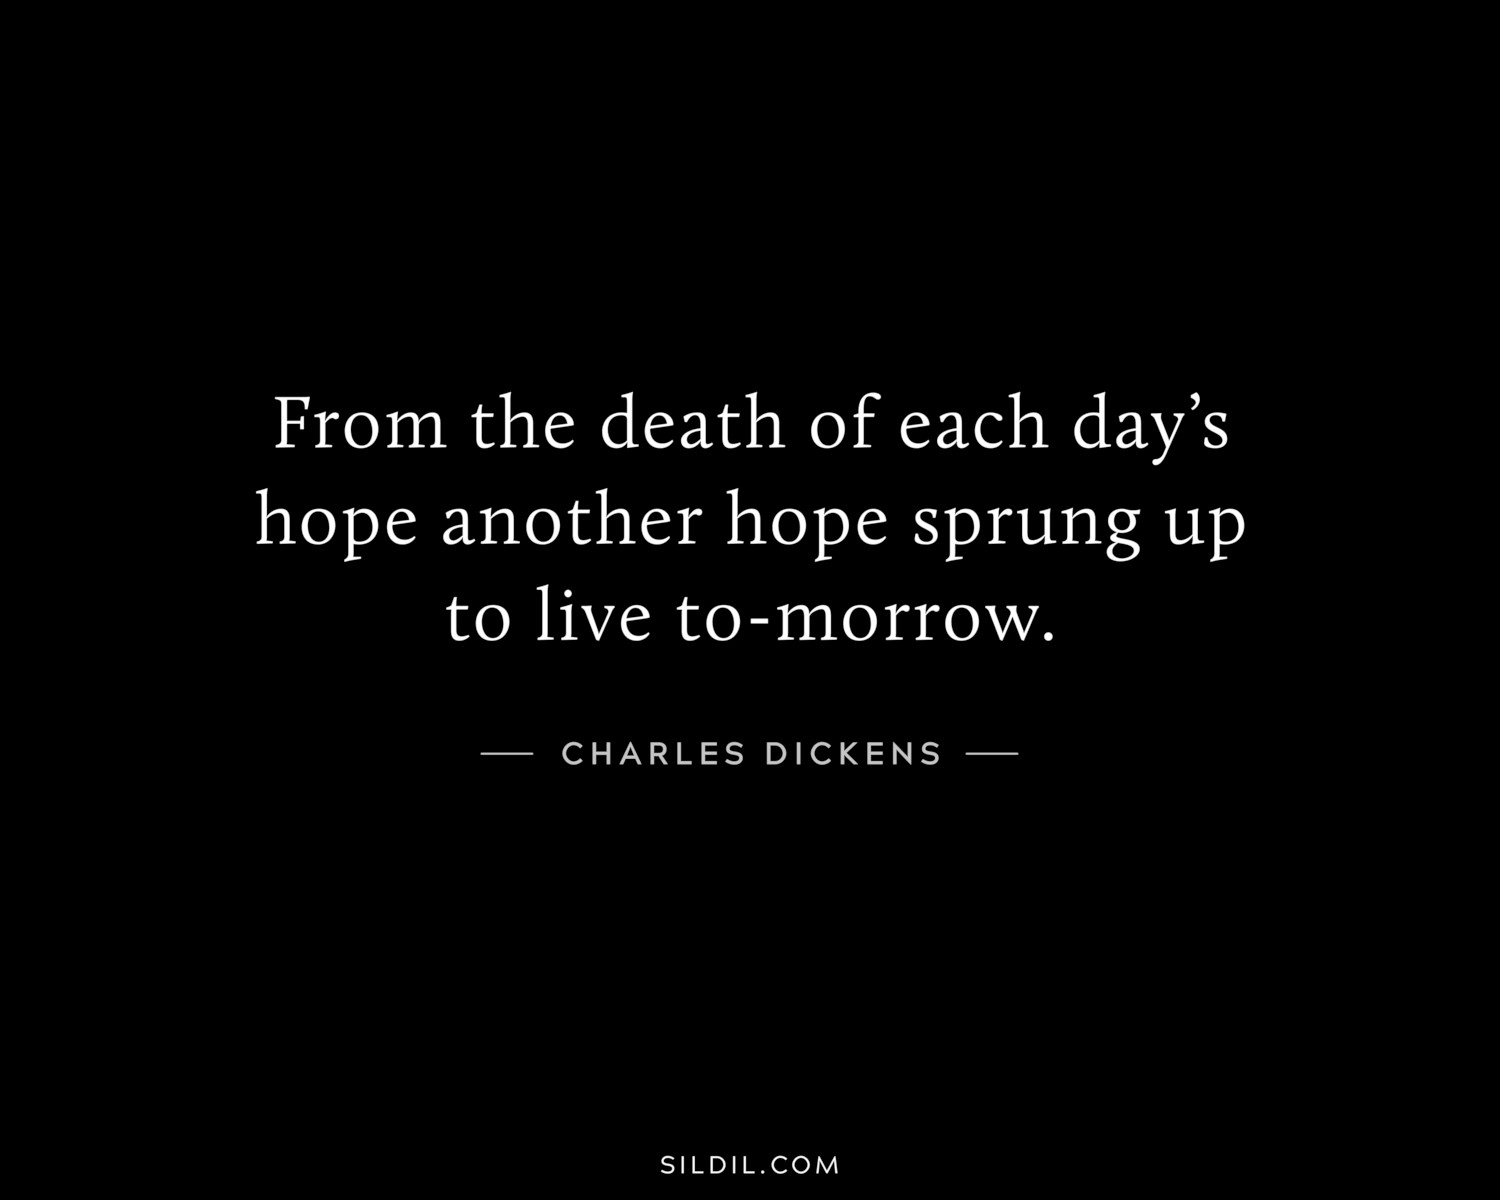 From the death of each day’s hope another hope sprung up to live to-morrow.